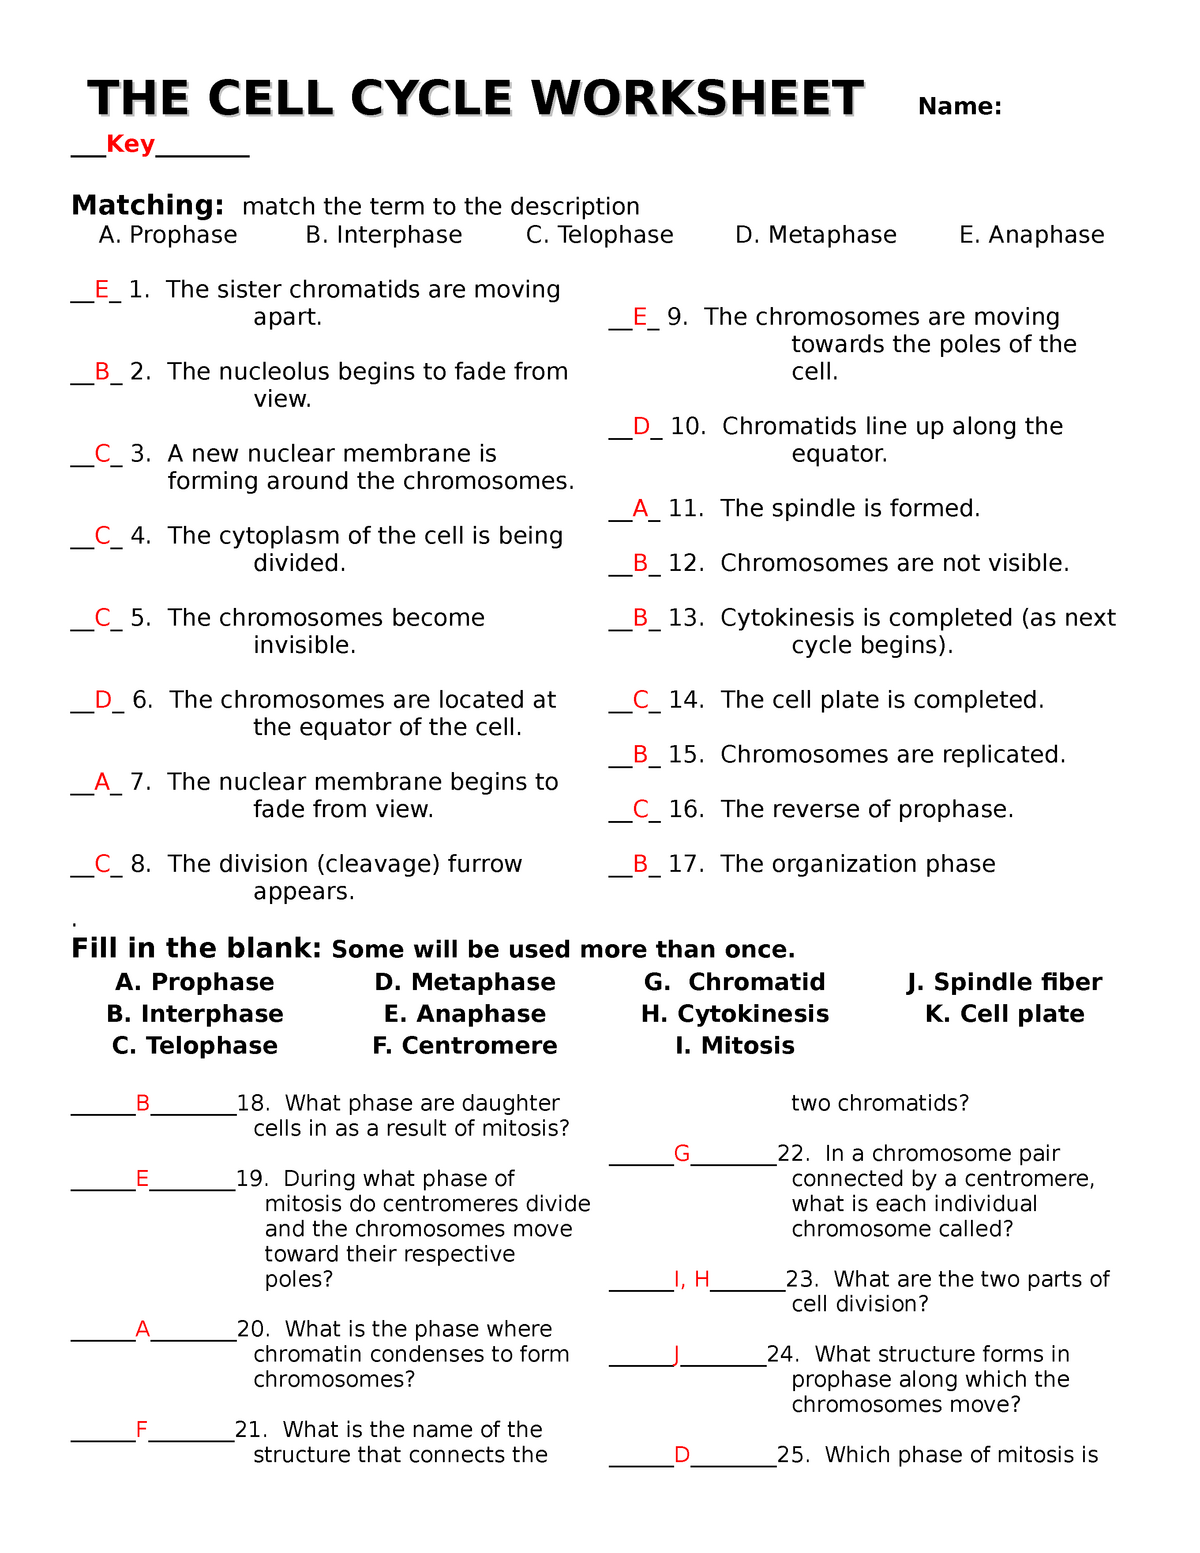 The-cell-cycle-worksheet with answers - BIOG-24 - Explorations in With Regard To The Cell Cycle Worksheet